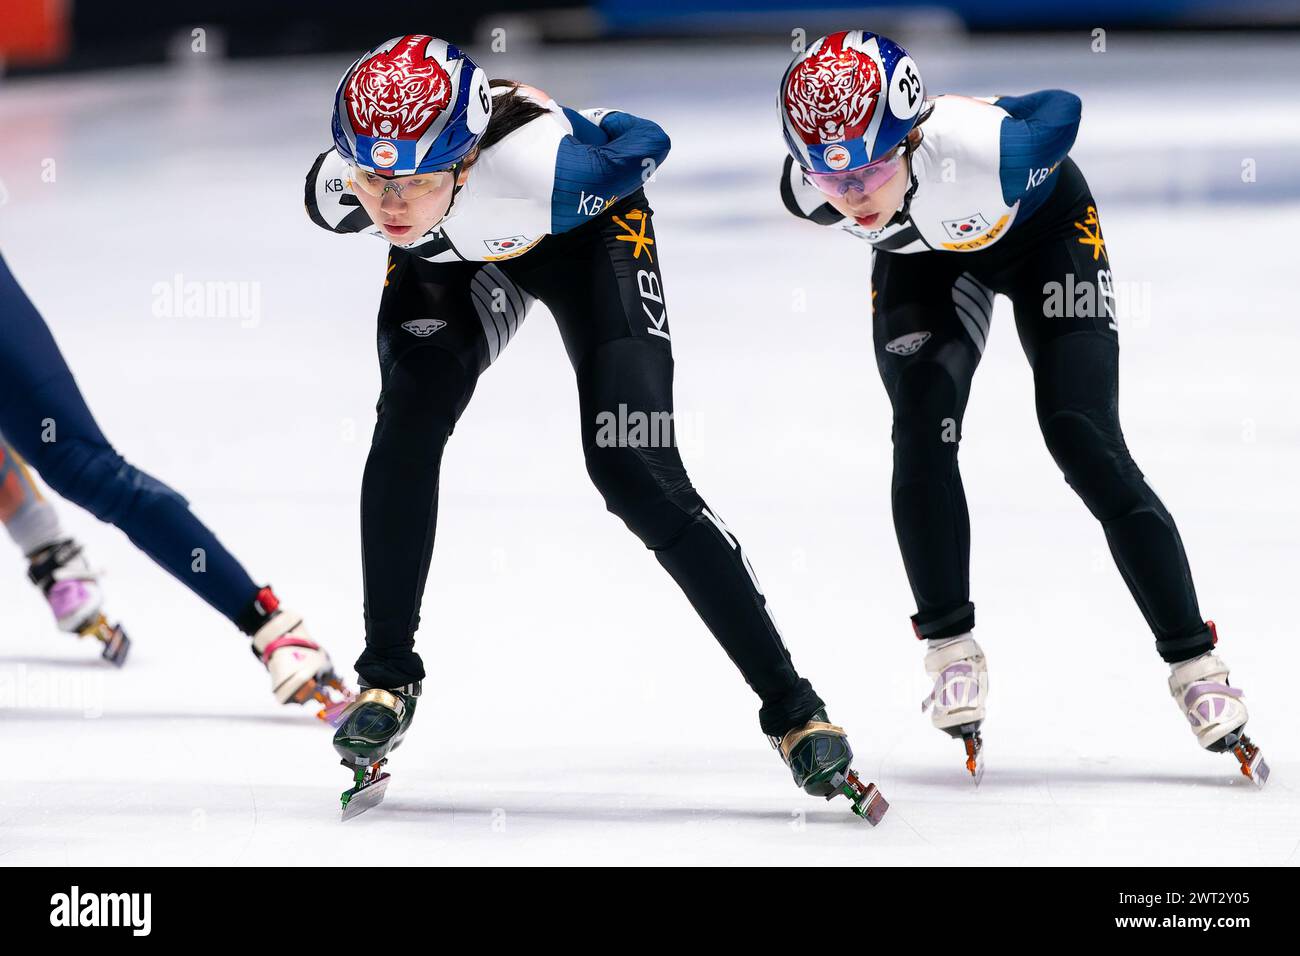 Rotterdam, Netherlands. 15th Mar, 2024. ROTTERDAM, NETHERLANDS - MARCH 15: Suk Hee Shim of Korea and So Yeon Lee of Korea competing in the Women's 1500m during Day 1 of the ISU World Short Track Speed Skating Championships 2024 at Ahoy on March 15, 2024 in Rotterdam, Netherlands. (Photo by Joris Verwijst/BSR Agency) Credit: BSR Agency/Alamy Live News Stock Photo